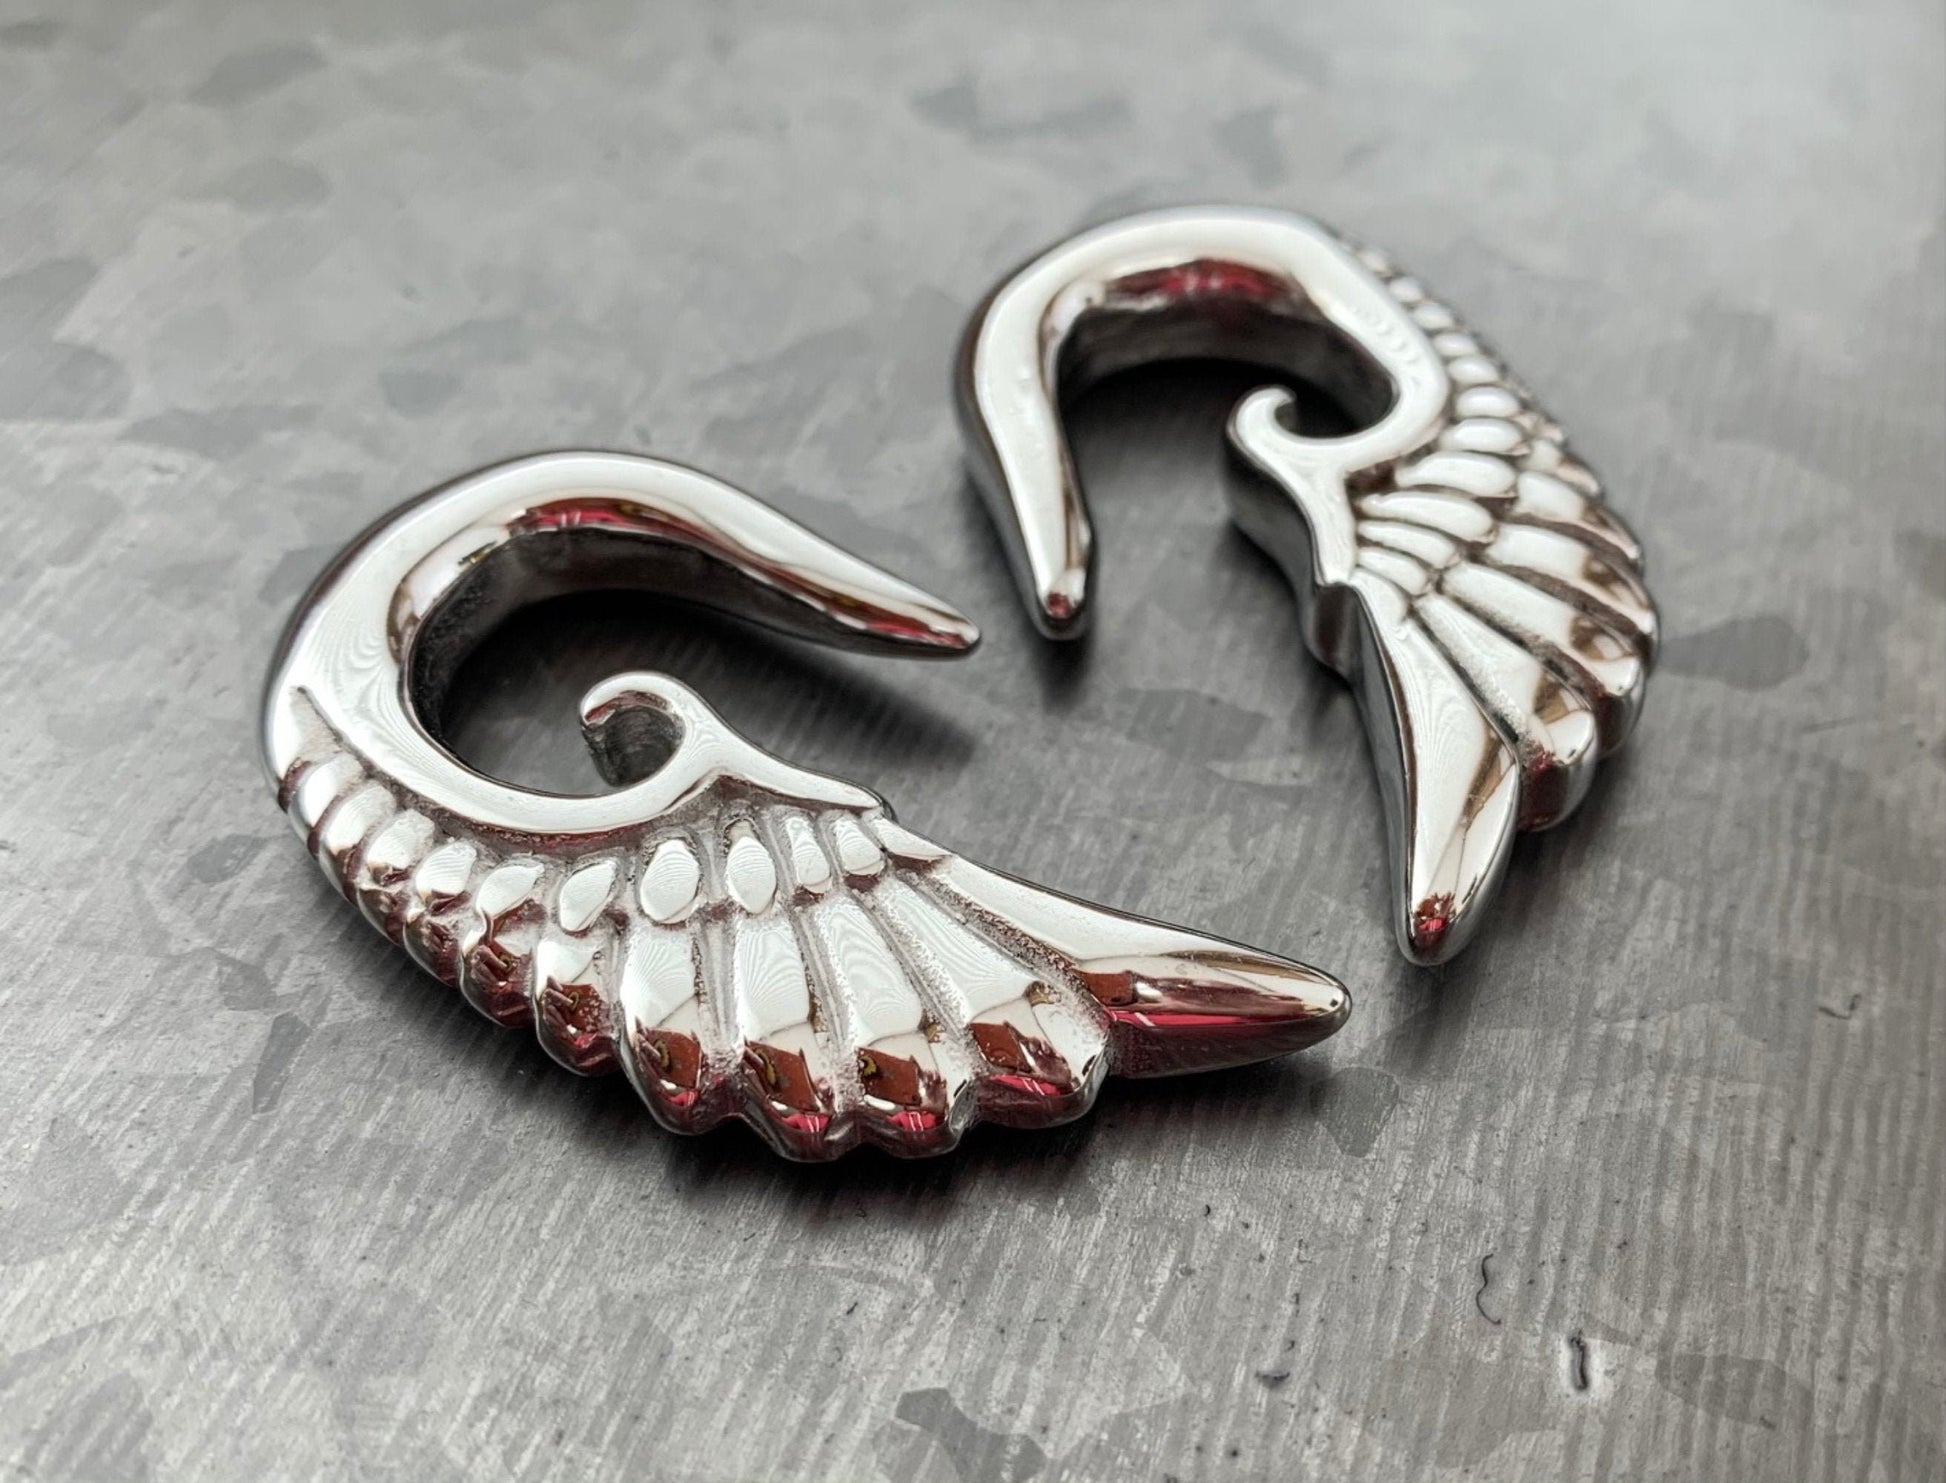 PAIR of Stunning 316L Surgical Steel Angel Wing Hanging Tapers Expanders - Gauges 14g (1.3mm) thru 0g (8mm) available!